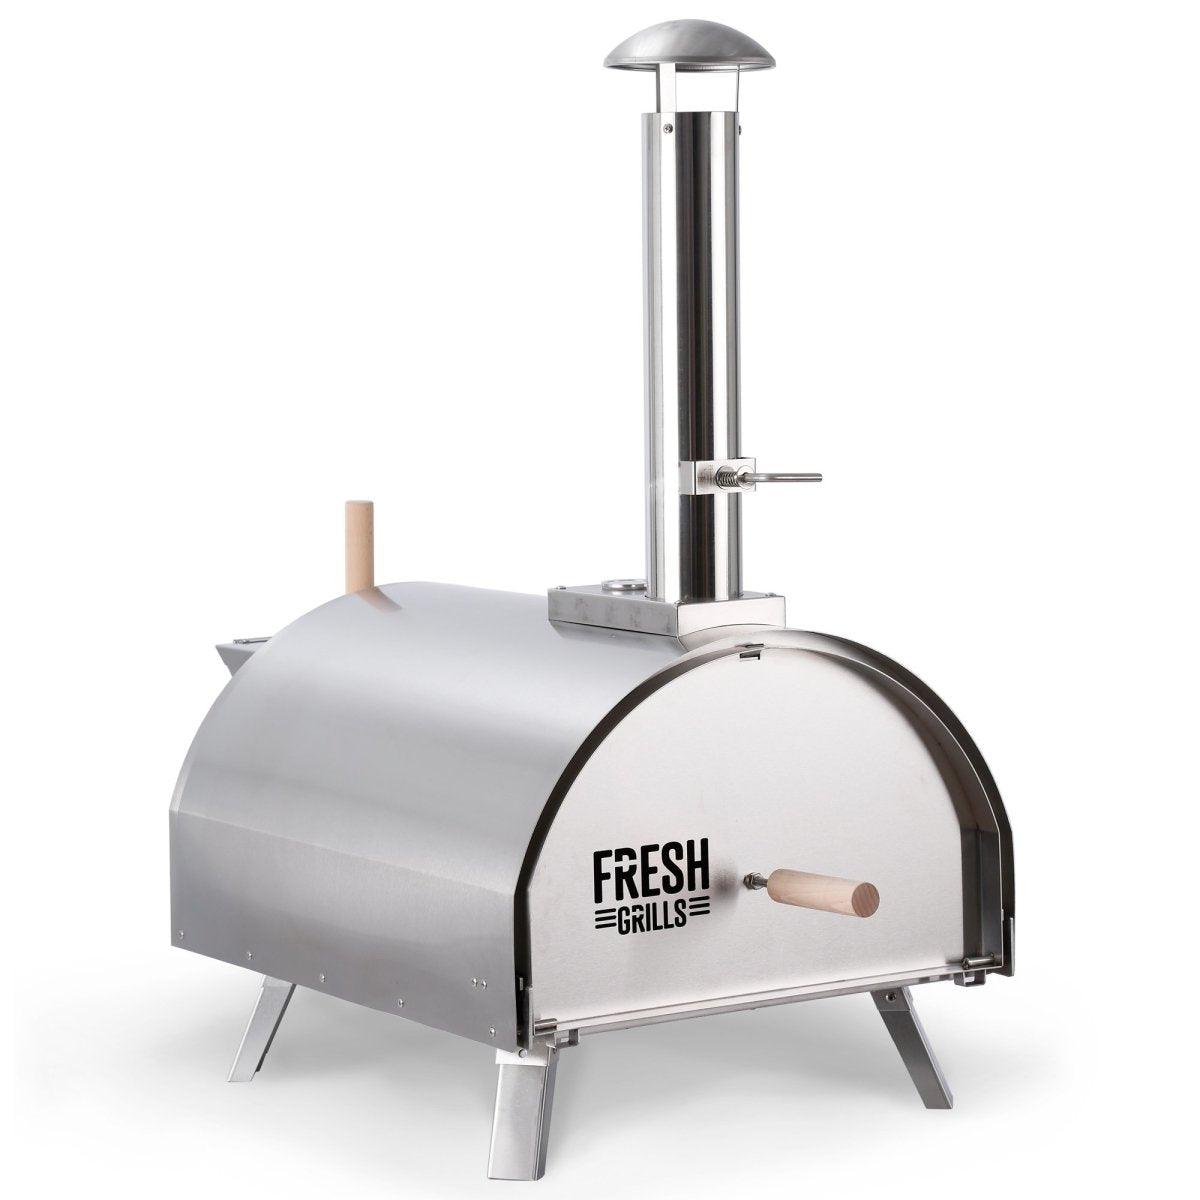 Extra Large Double walled Pizza Oven - Fresh Grills